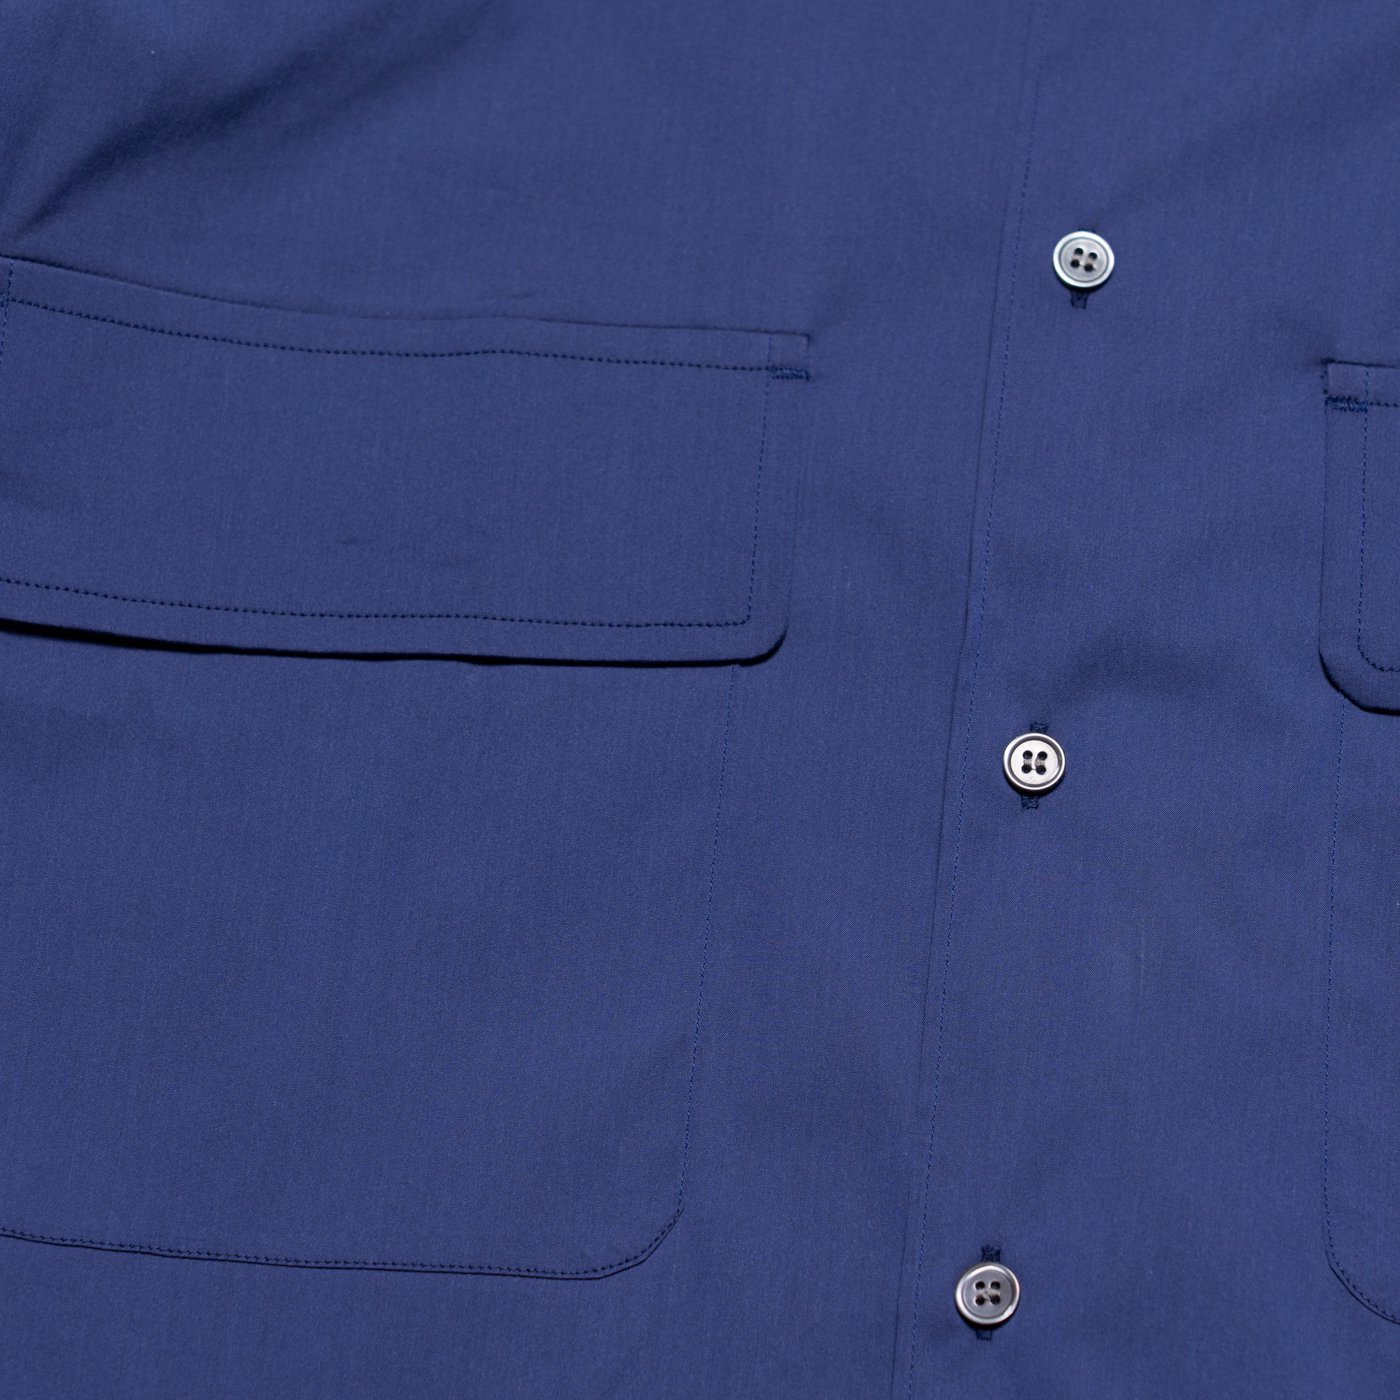 COMME des GARCONS SHIRT * 23AW Collection Cotton Double Pocket Shirt * Navy